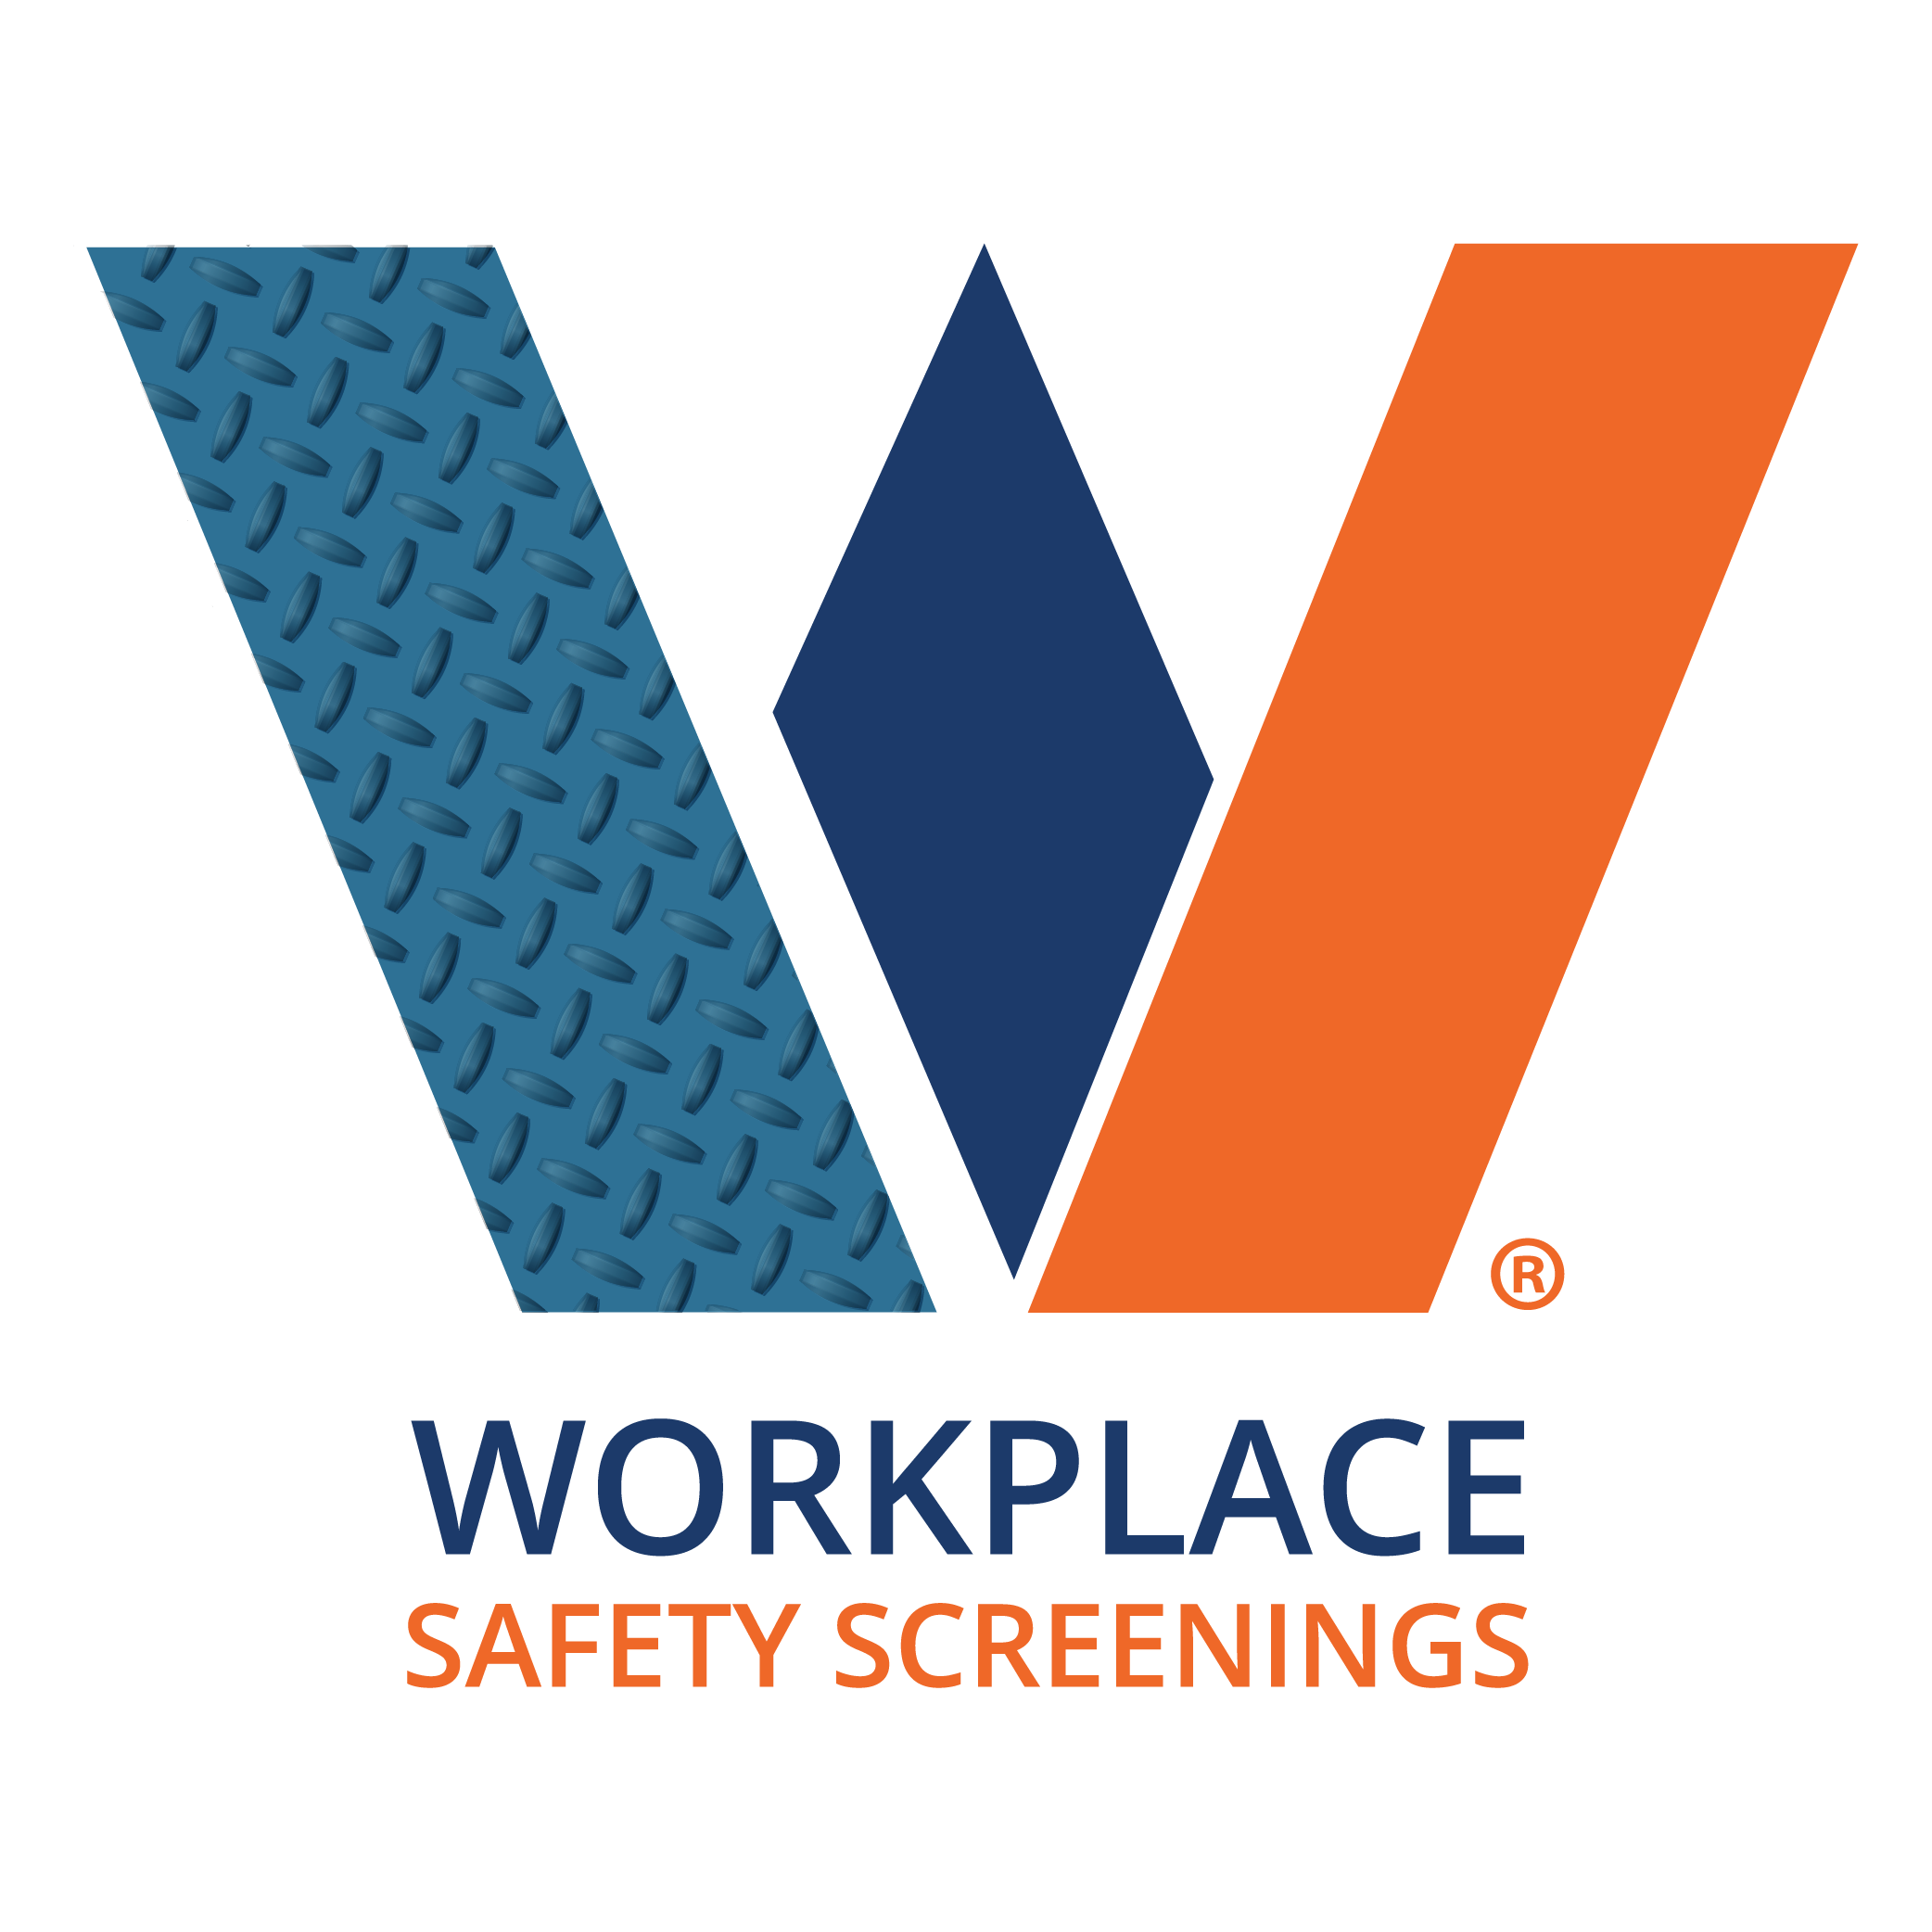 Workplace Safety Screenings